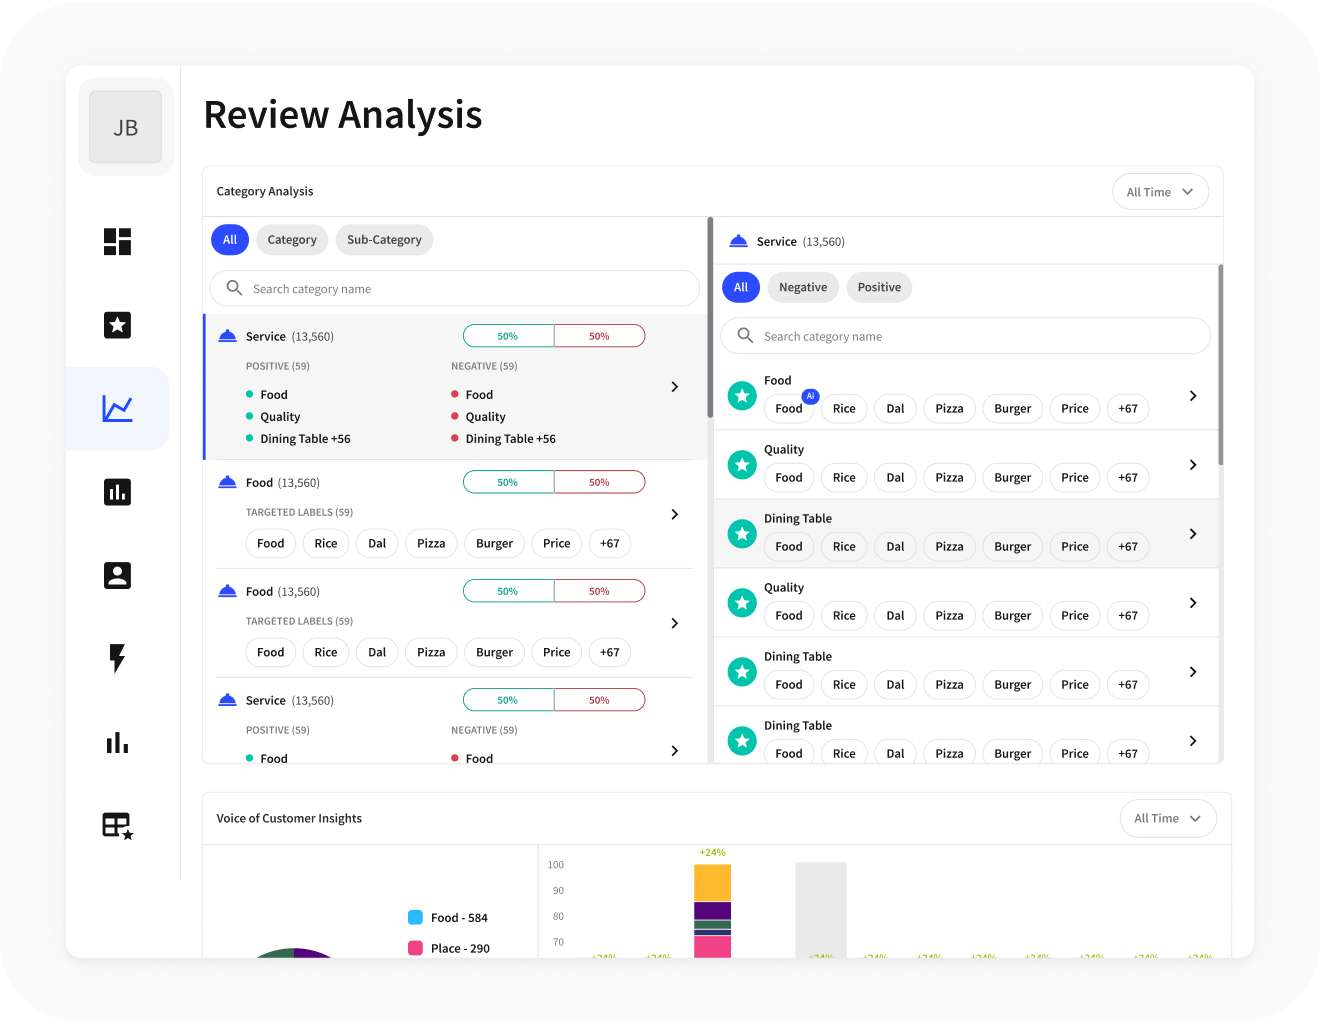 Business analytics dashboard displaying review analysis with sentiment breakdown for food and service categories, including targeted labels and a bar chart for voice of customer insights.